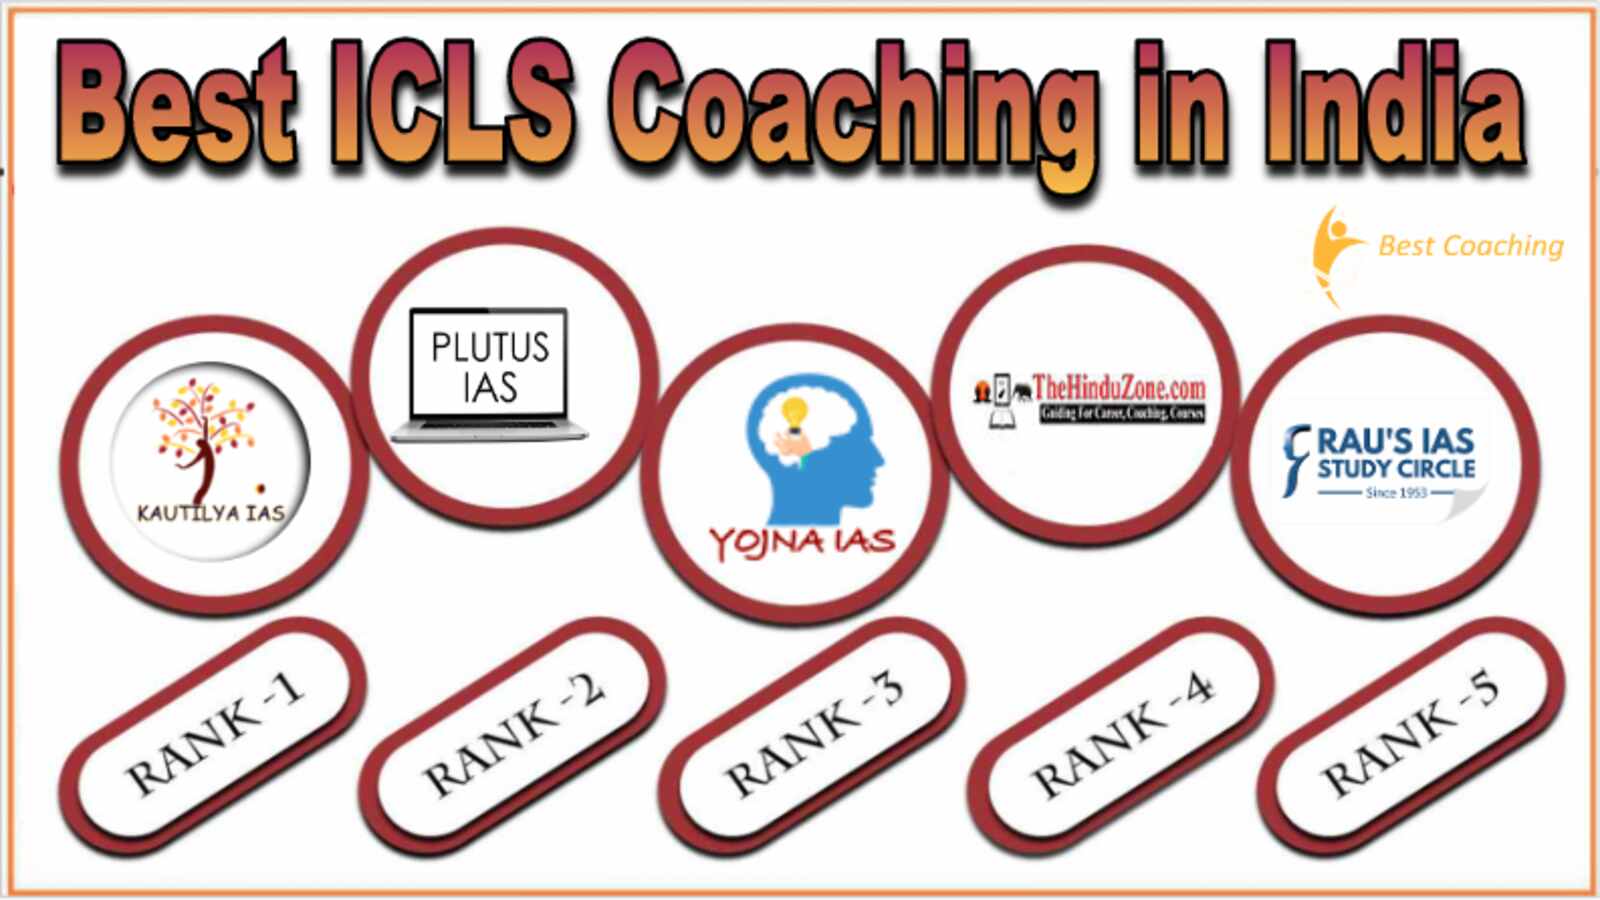 Best ICLS Coaching in India